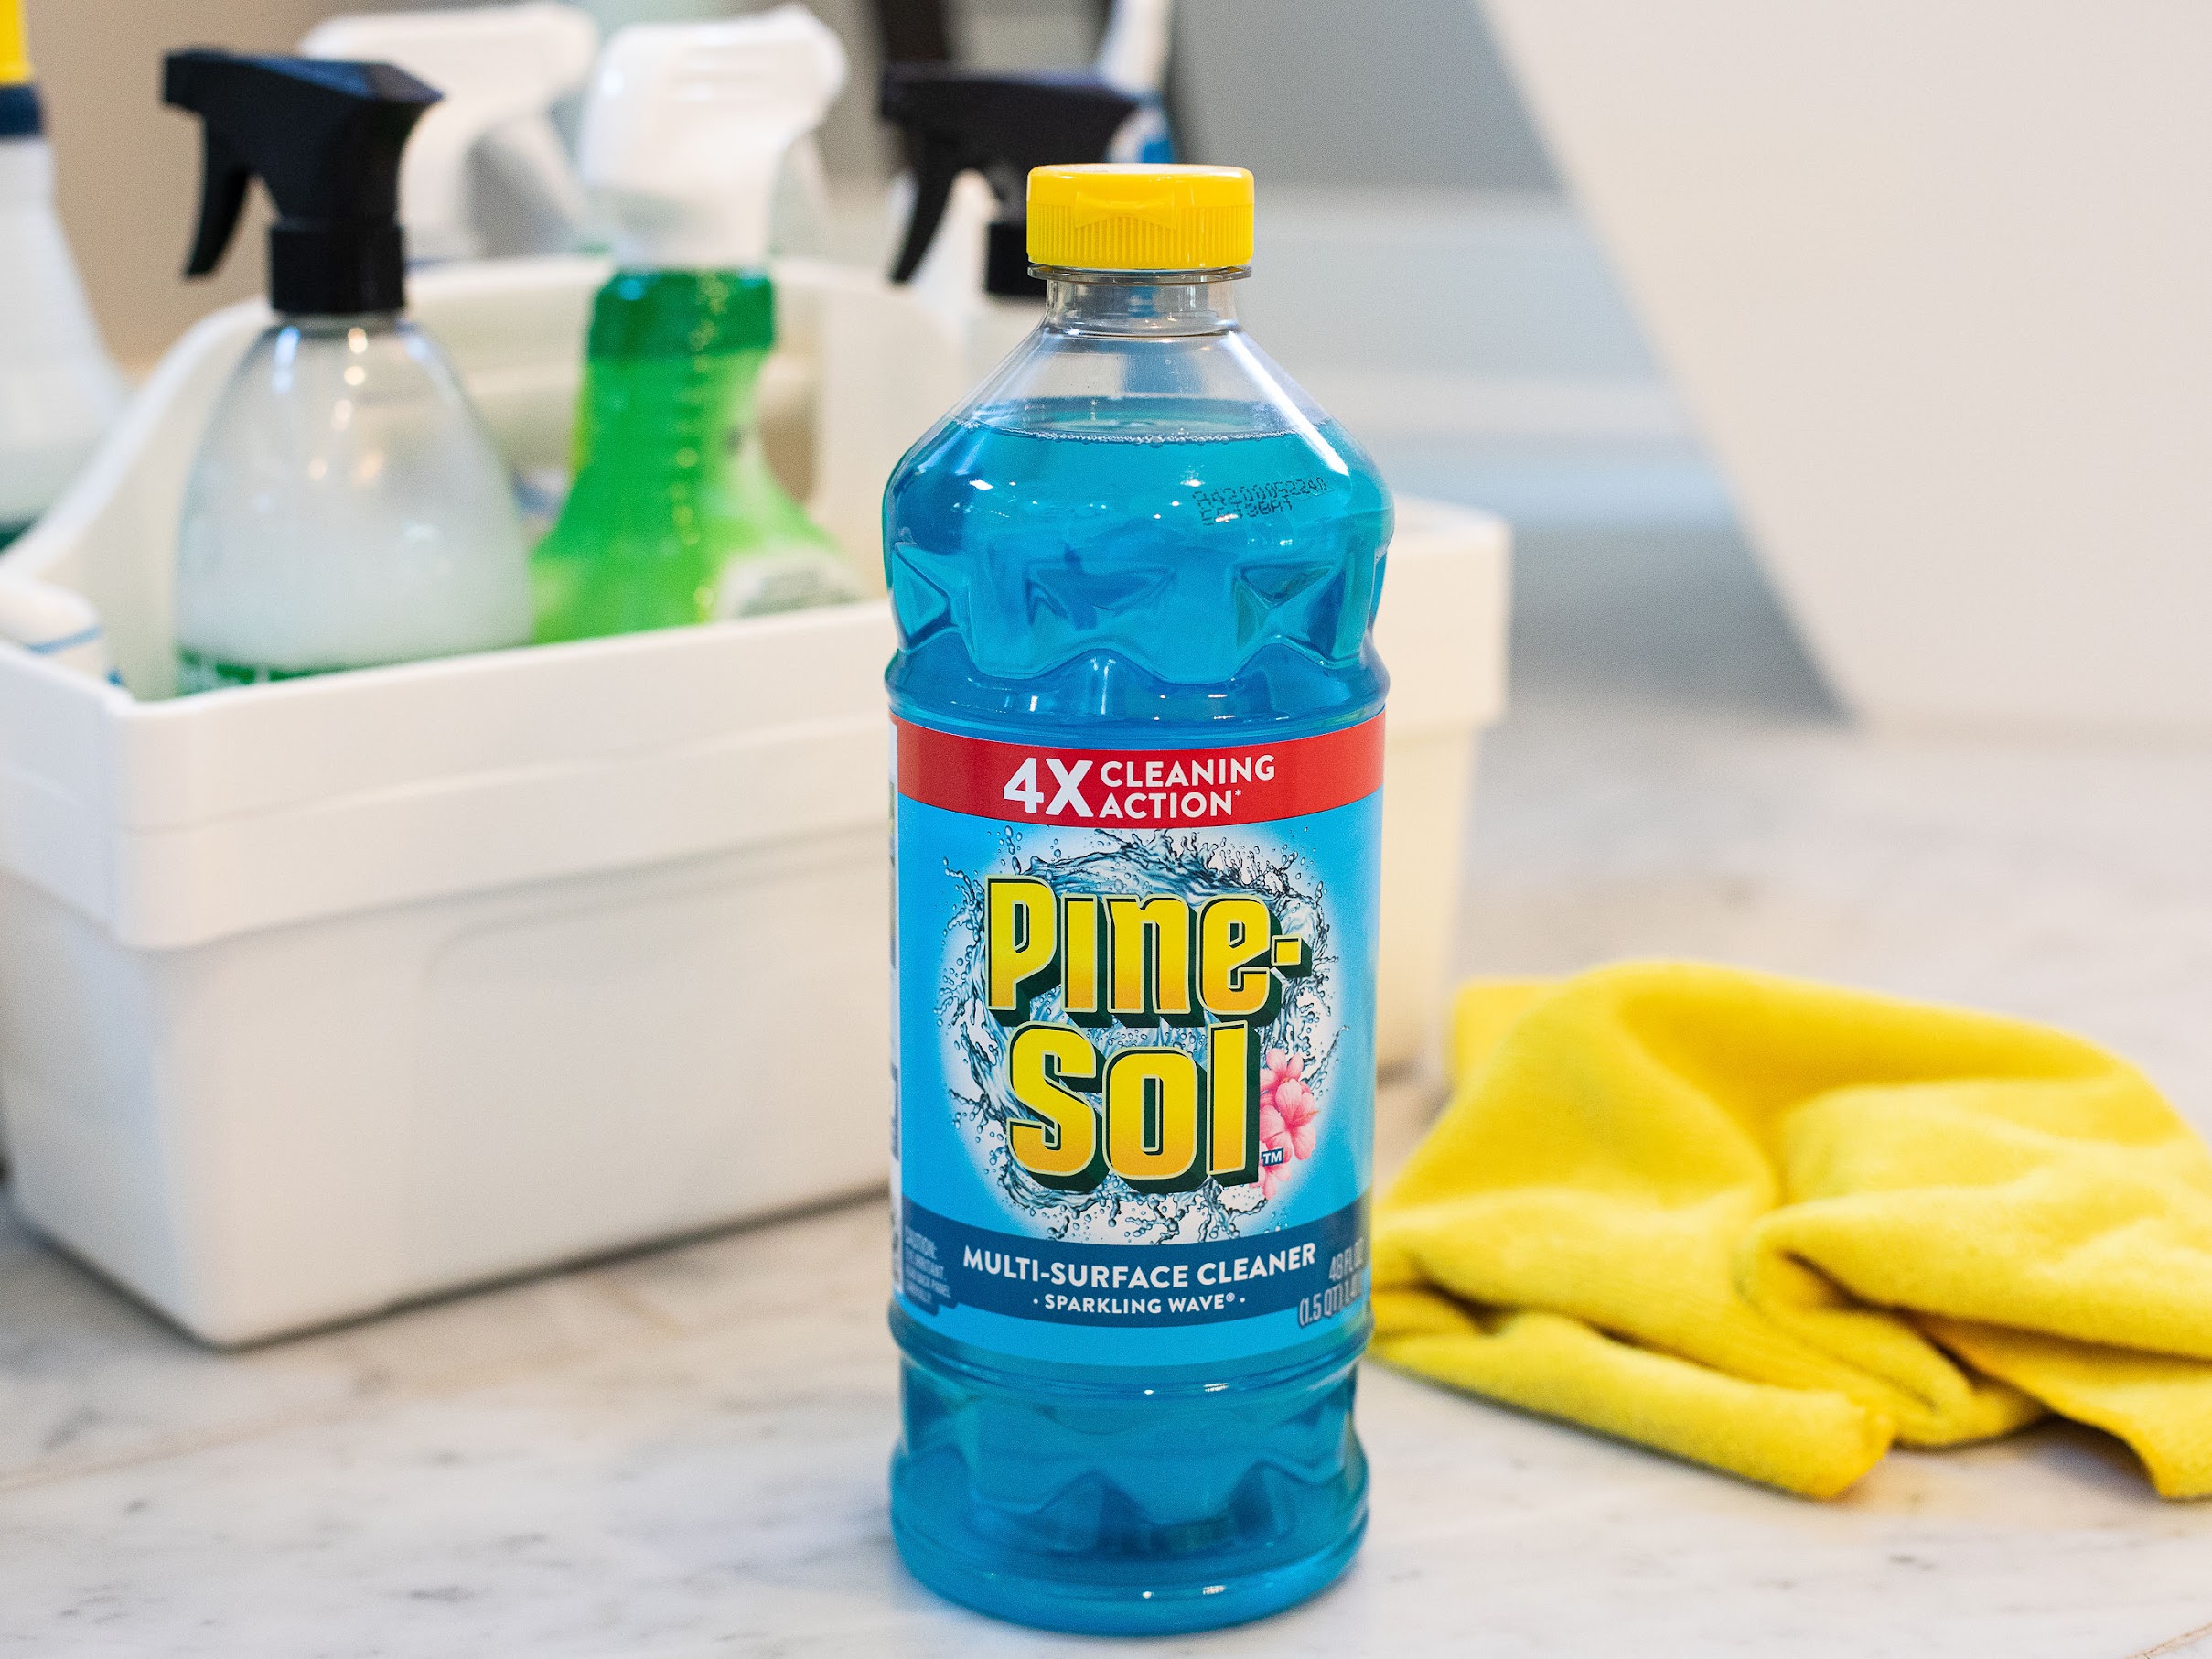 Pine-Sol Multi-Surface Cleaner As Low As $1.49 At Kroger